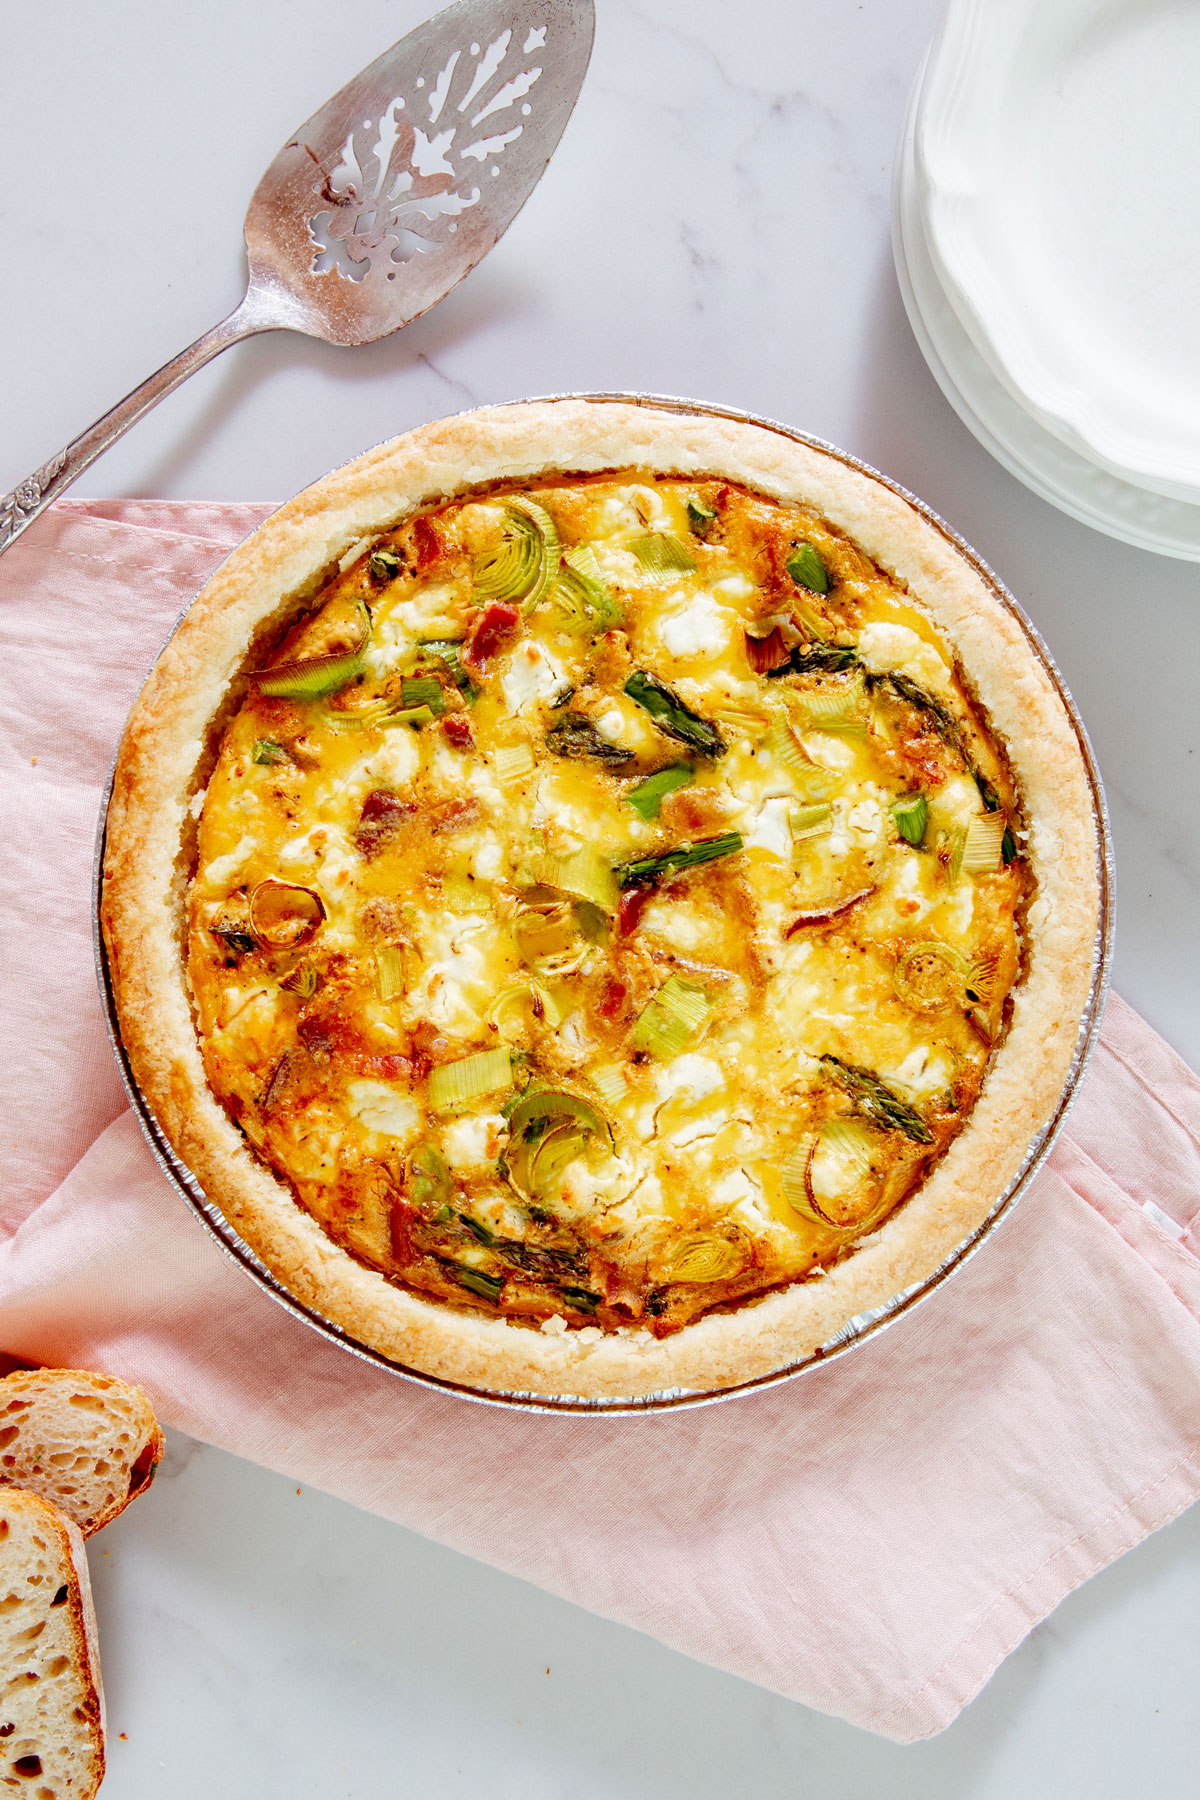 Spring Quiche with Leeks, Bacon, and Purple Haze Goat Cheese